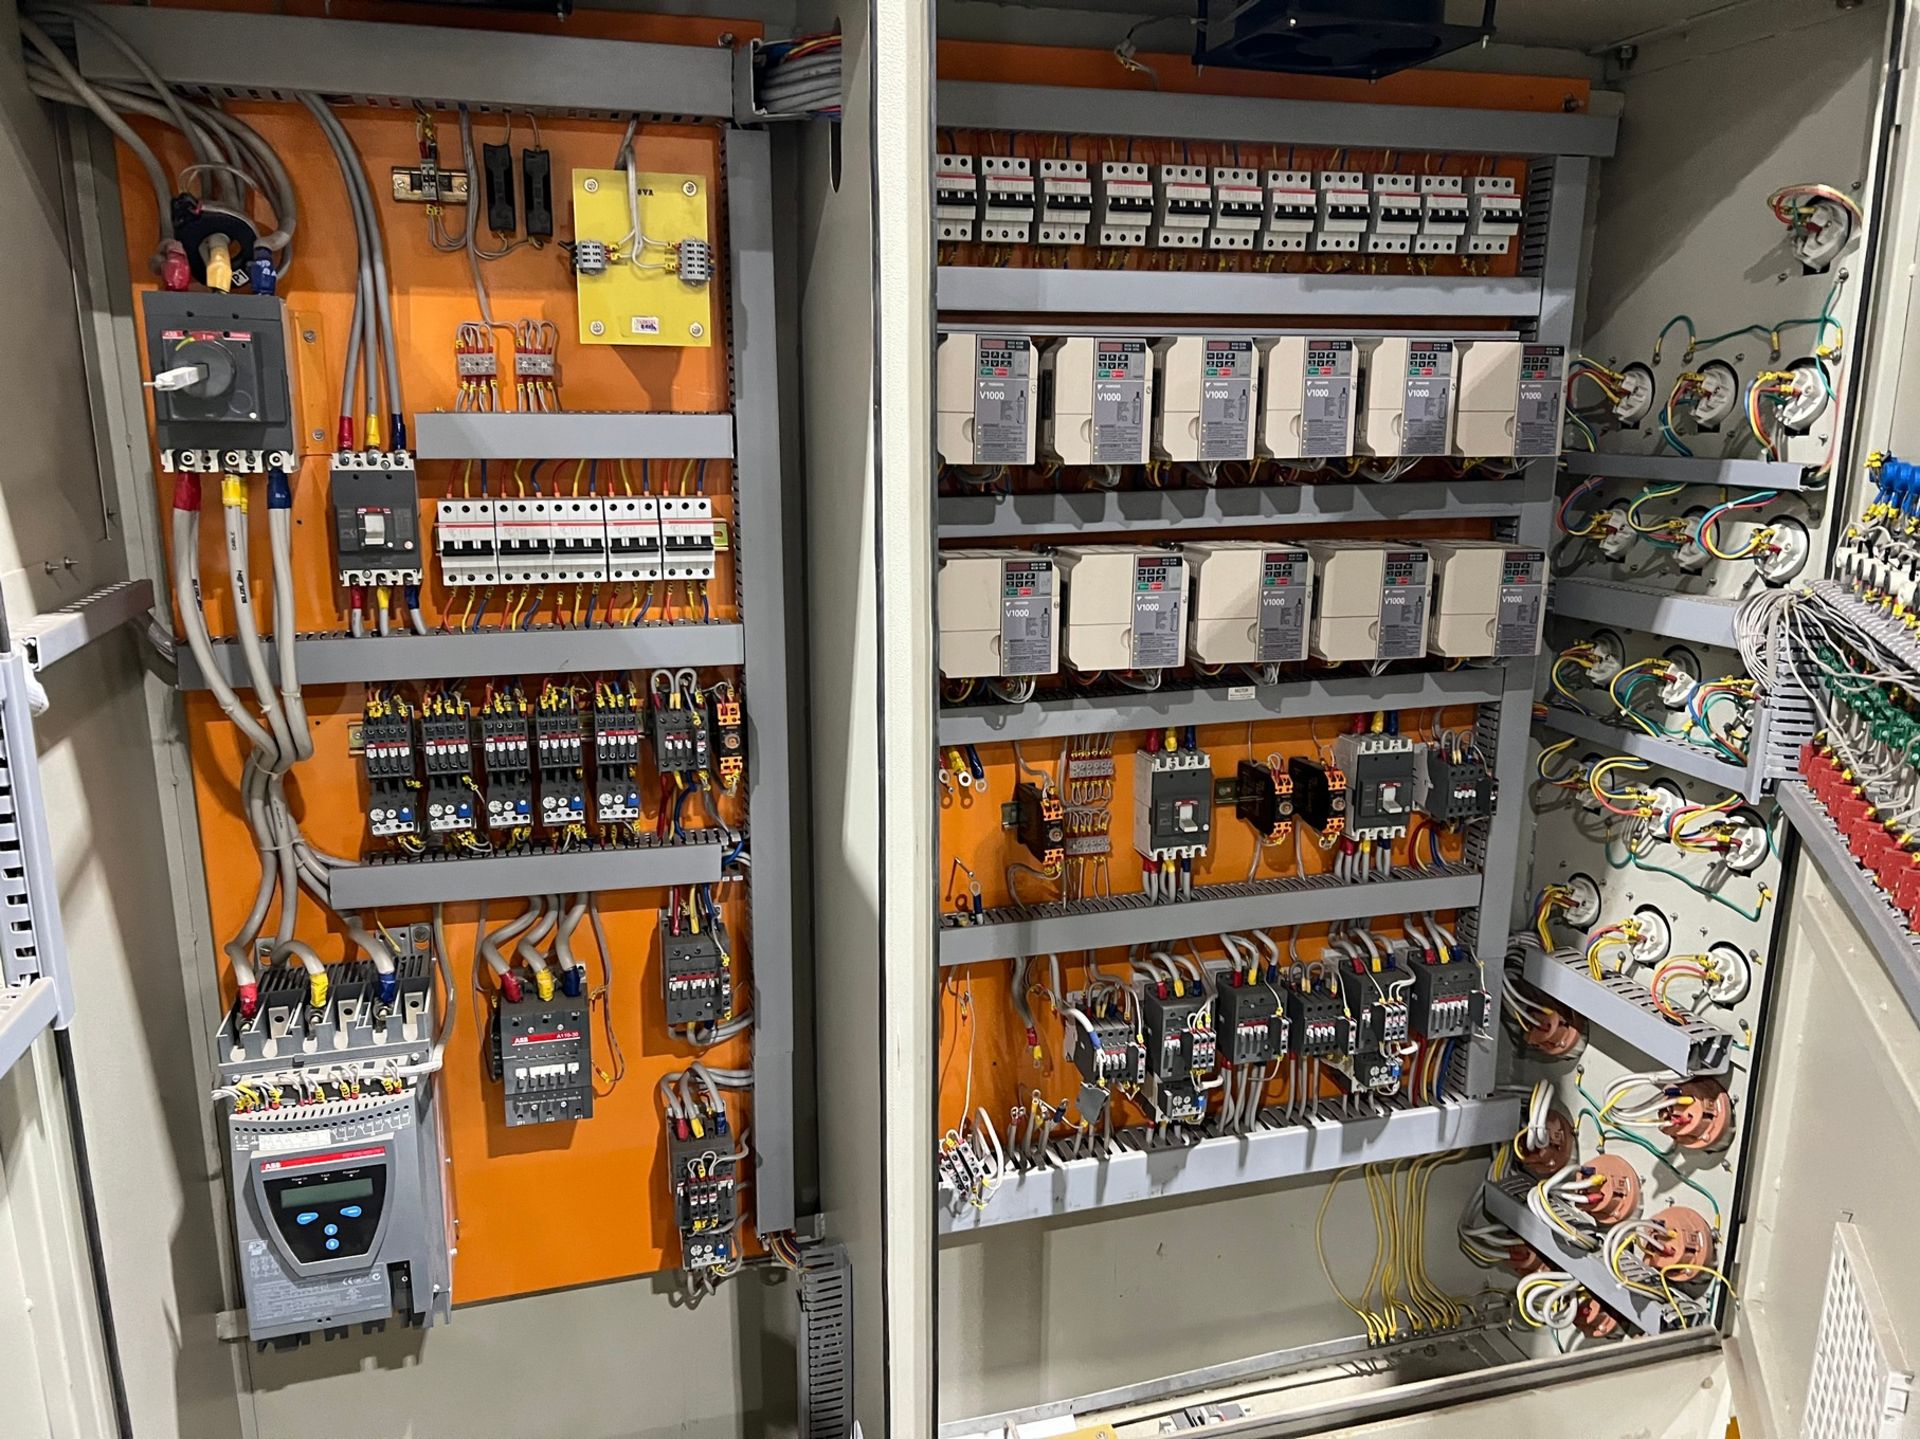 WASH LINE CONTROL PANELS, START/STOP CONTROL BUTTONS, YASKAWA AND ABB Drives - Image 16 of 16